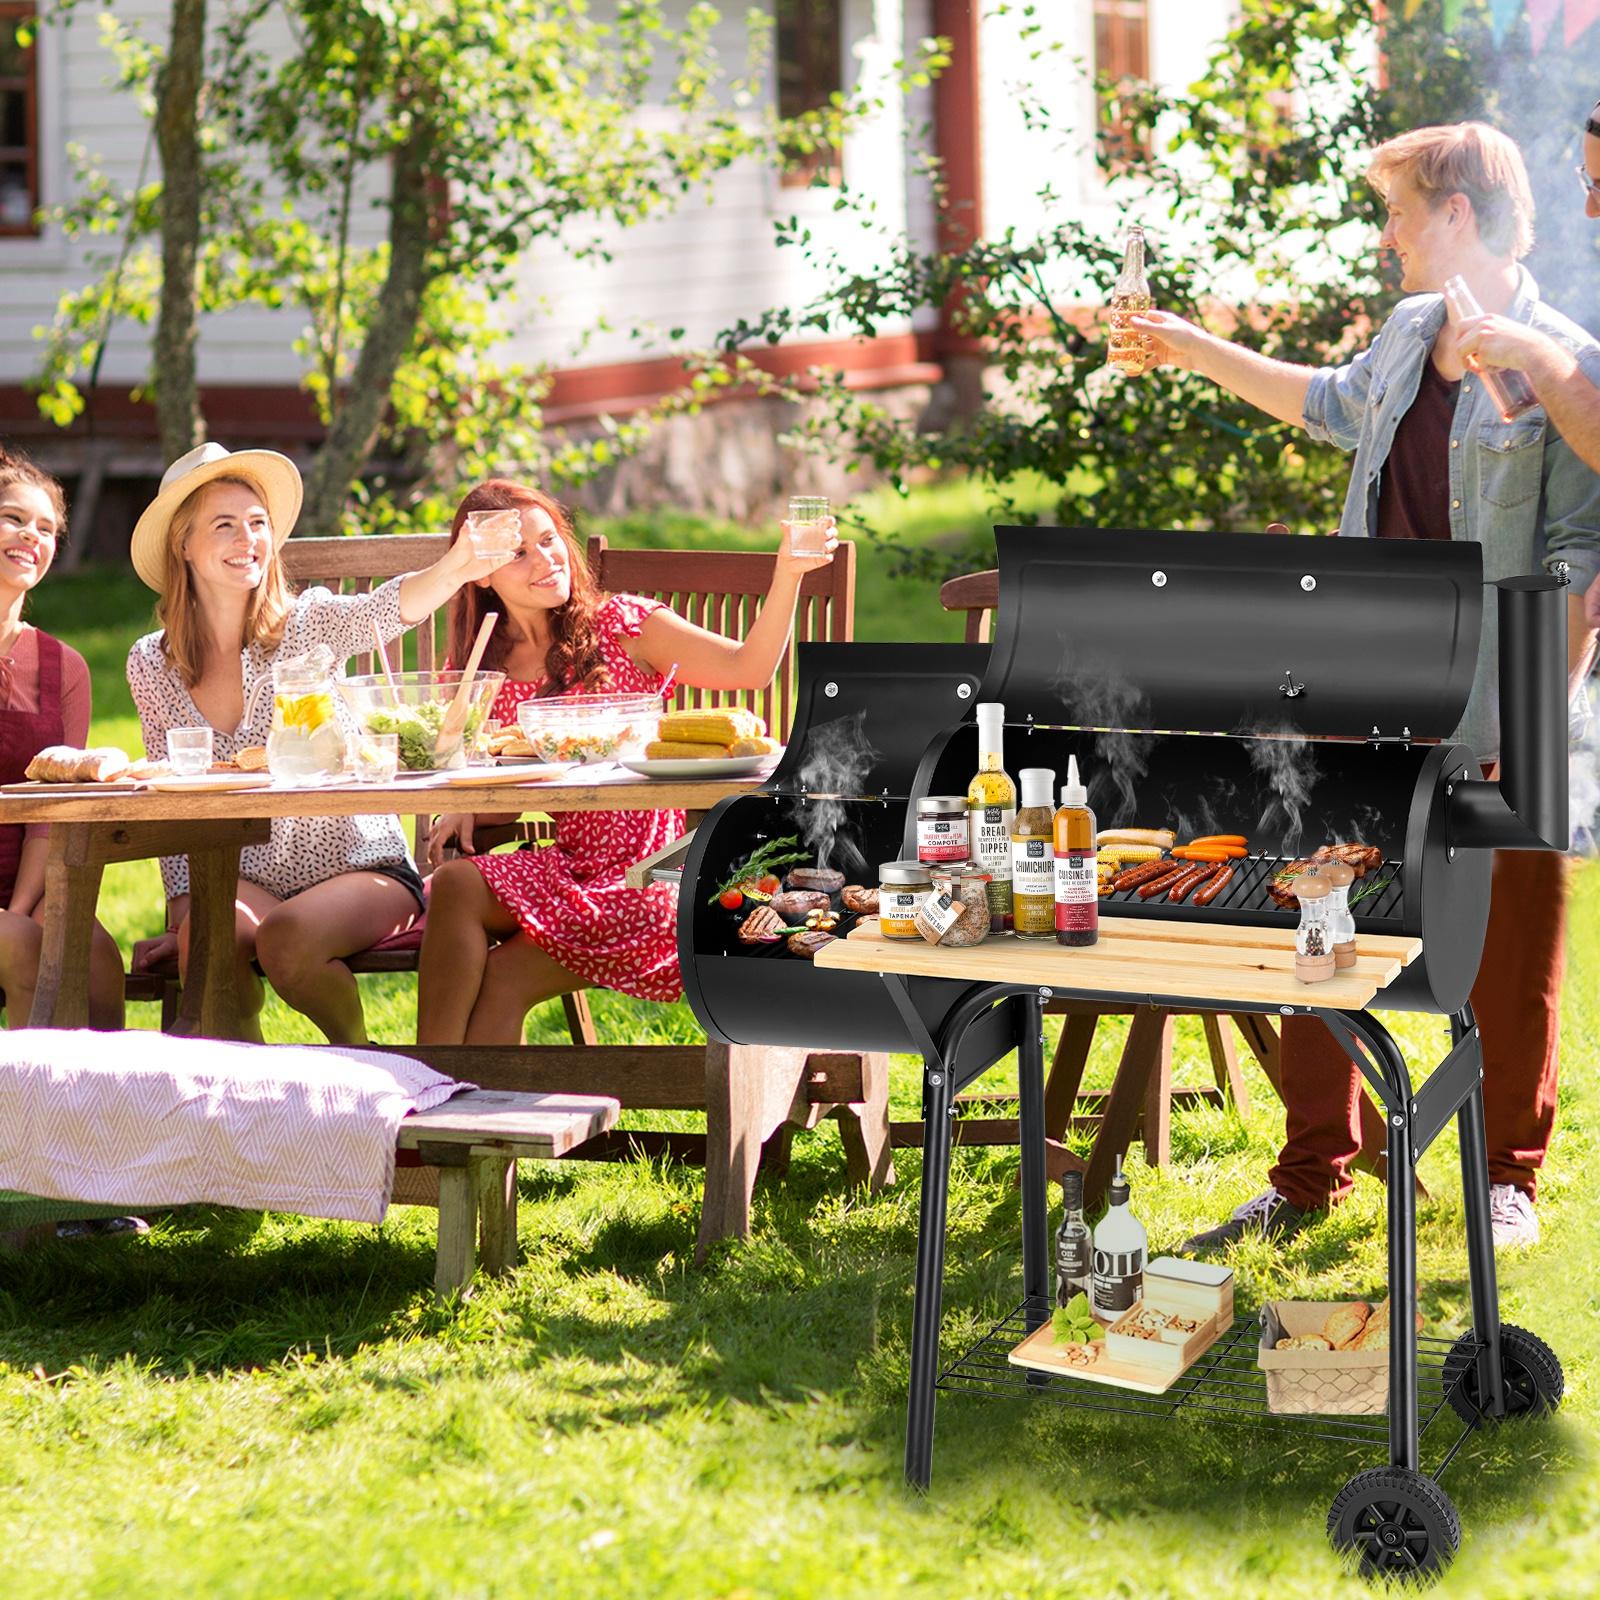 BBQ Charcoal Grill, 45.28-Inch Length Portable Barbecue Grill, Offset Smoker Barbecue Oven with Wheels & Thermometer for Outdoor Picnic Camping Patio Backyard, B026 - image 2 of 8